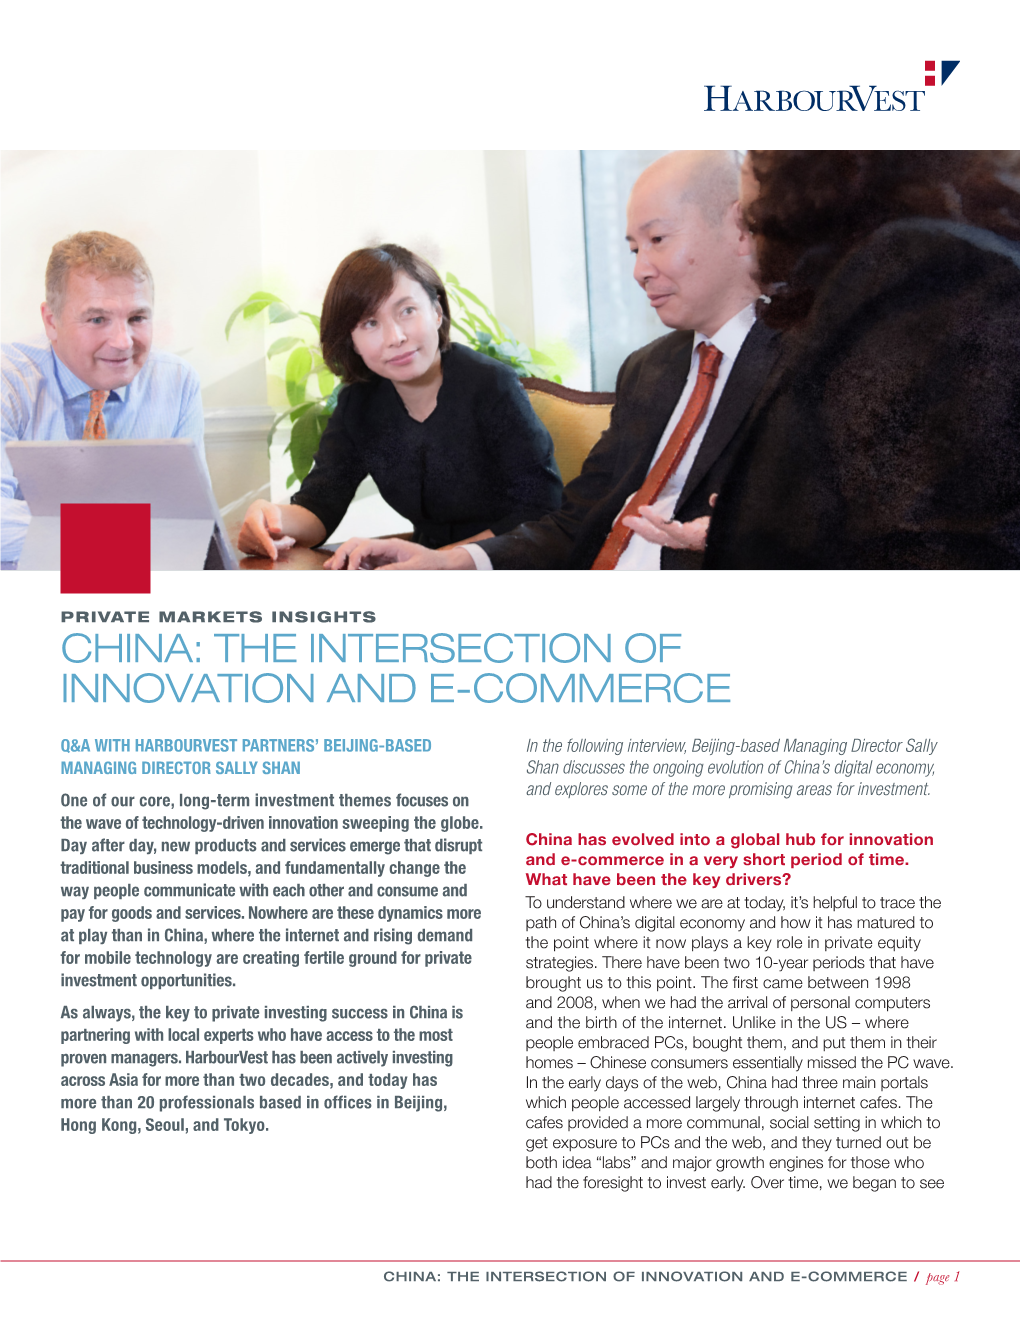 China: the Intersection of Innovation and E-Commerce